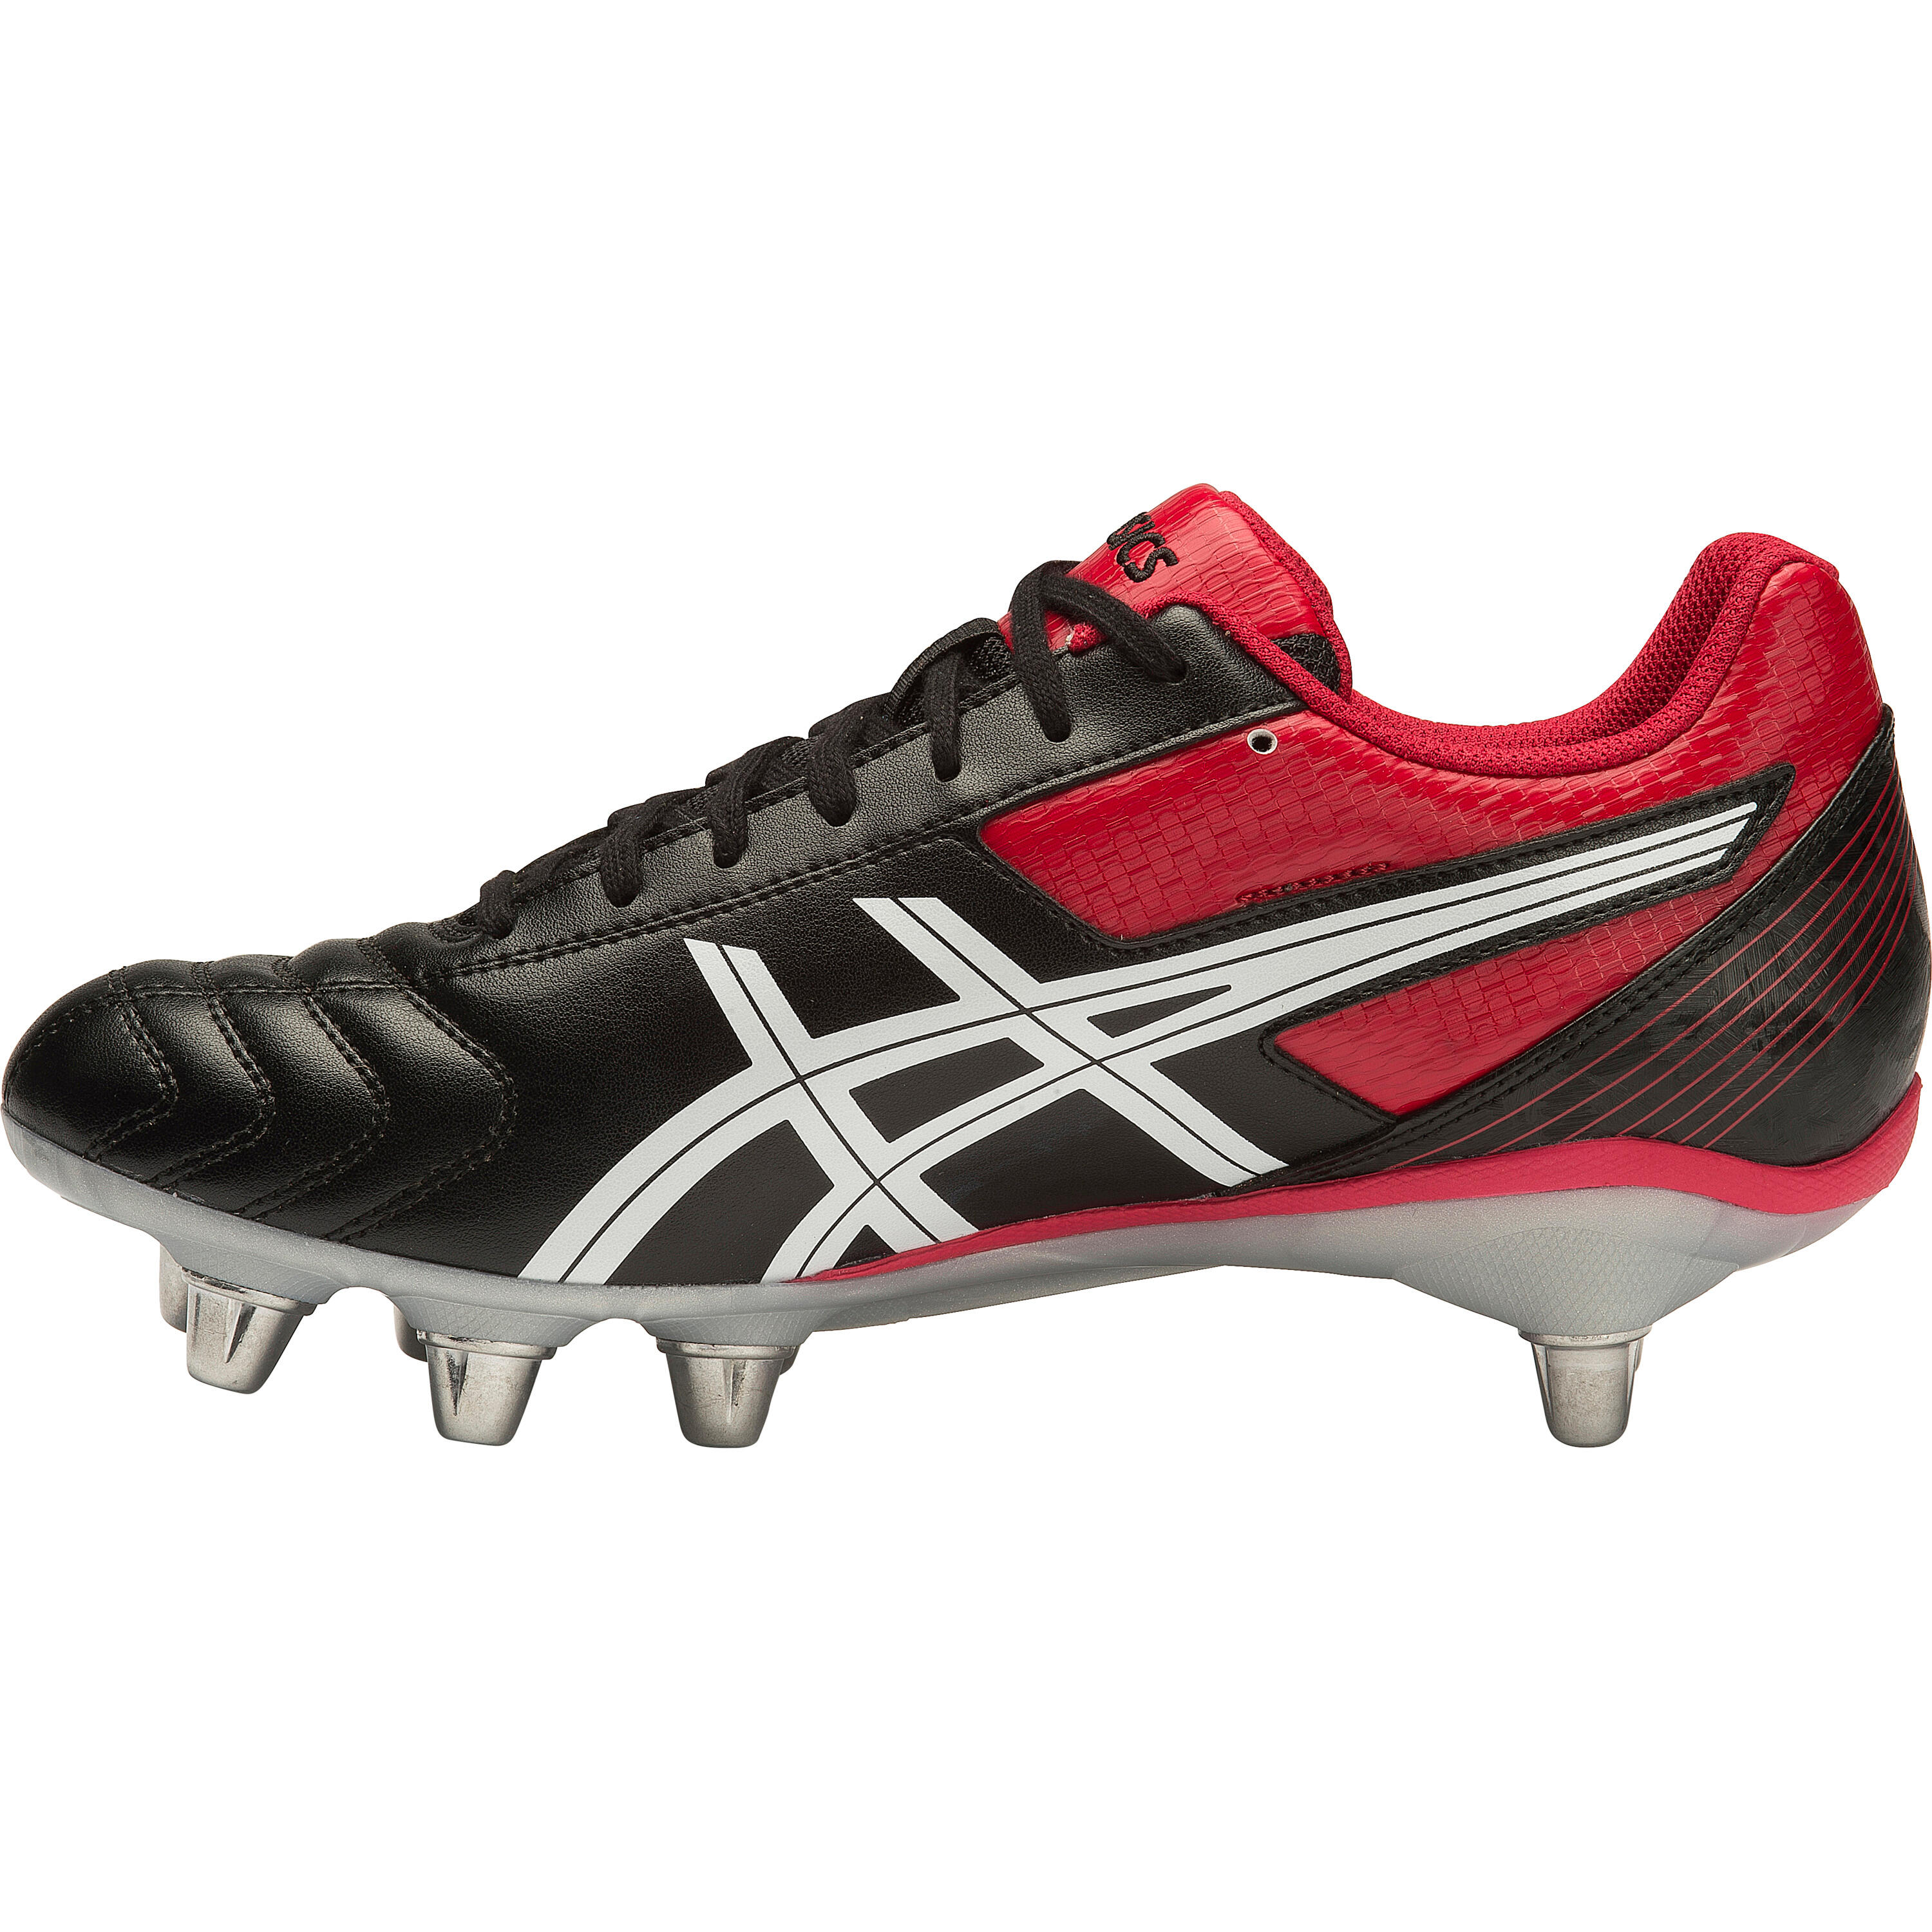 Asics Lethal Tackle Soft Ground Rugby Boots Adults  7 UK black/racing red/white 4/5